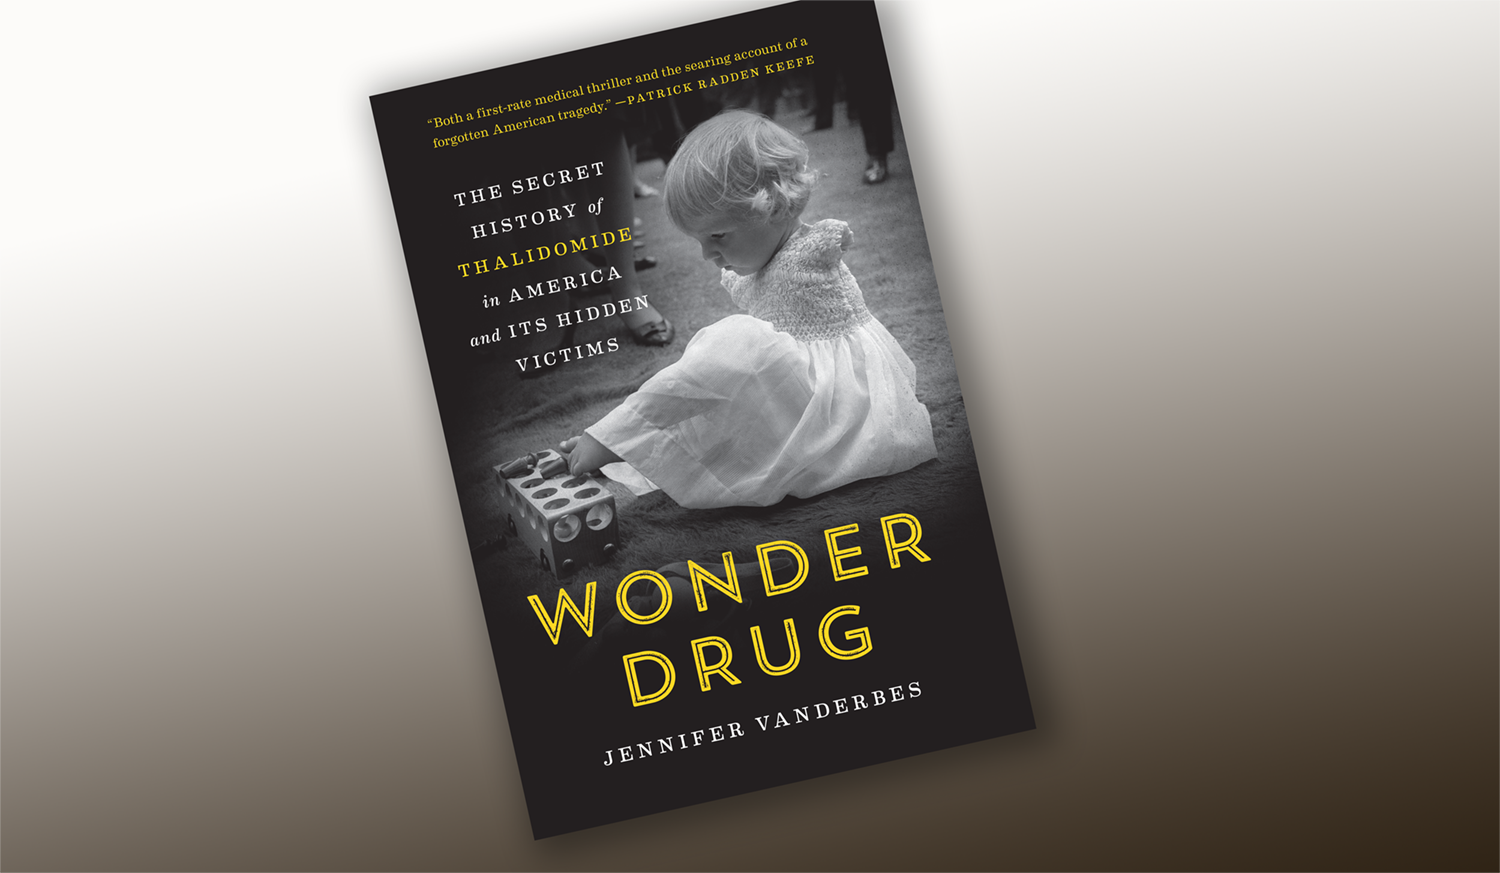 Book cover pictures child with curly blonde hair and no arms using her feet to play with a toy. Wonder Drug: The Secret History Of Thalidomide In America And Its Hidden Victims.